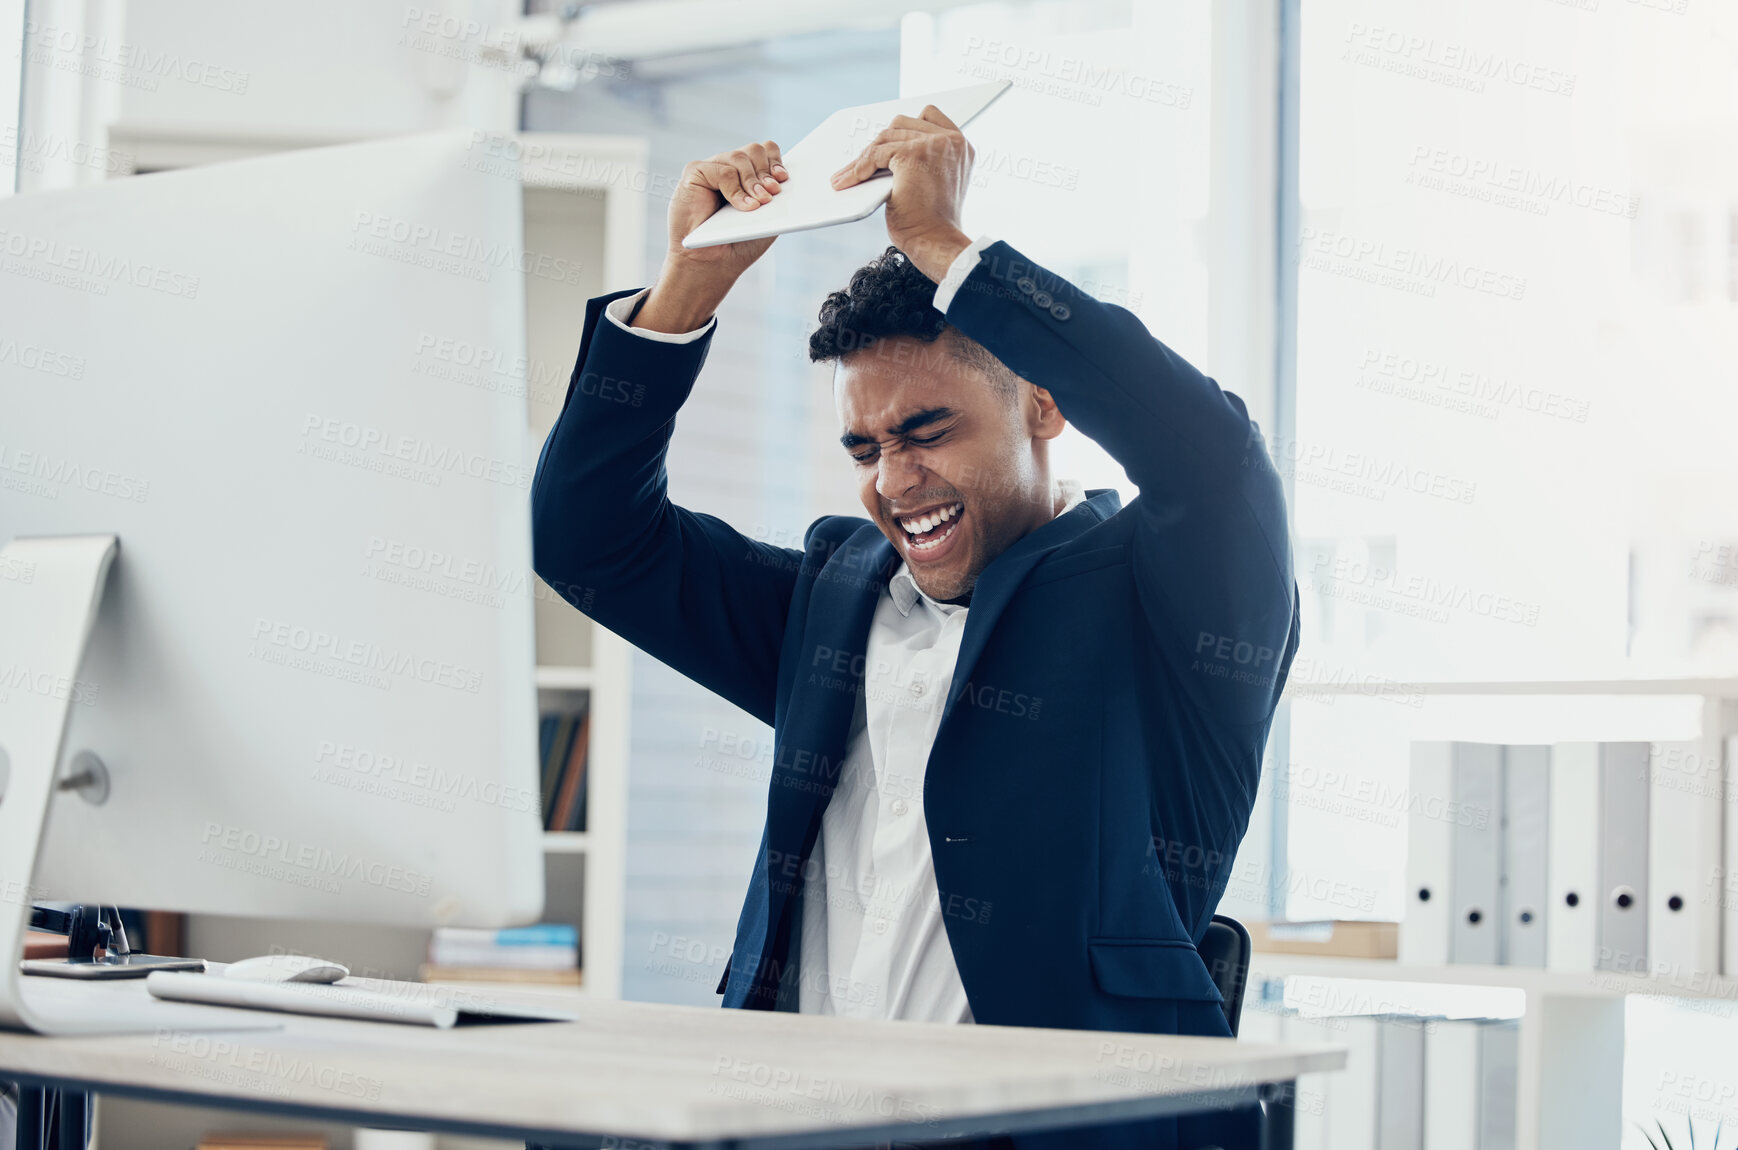 Buy stock photo Angry, stress and businessman breaking technology in digital marketing office, advertising startup or company after 404 glitch. Mad, shouting or aggressive worker smashing tablet in rage from mistake